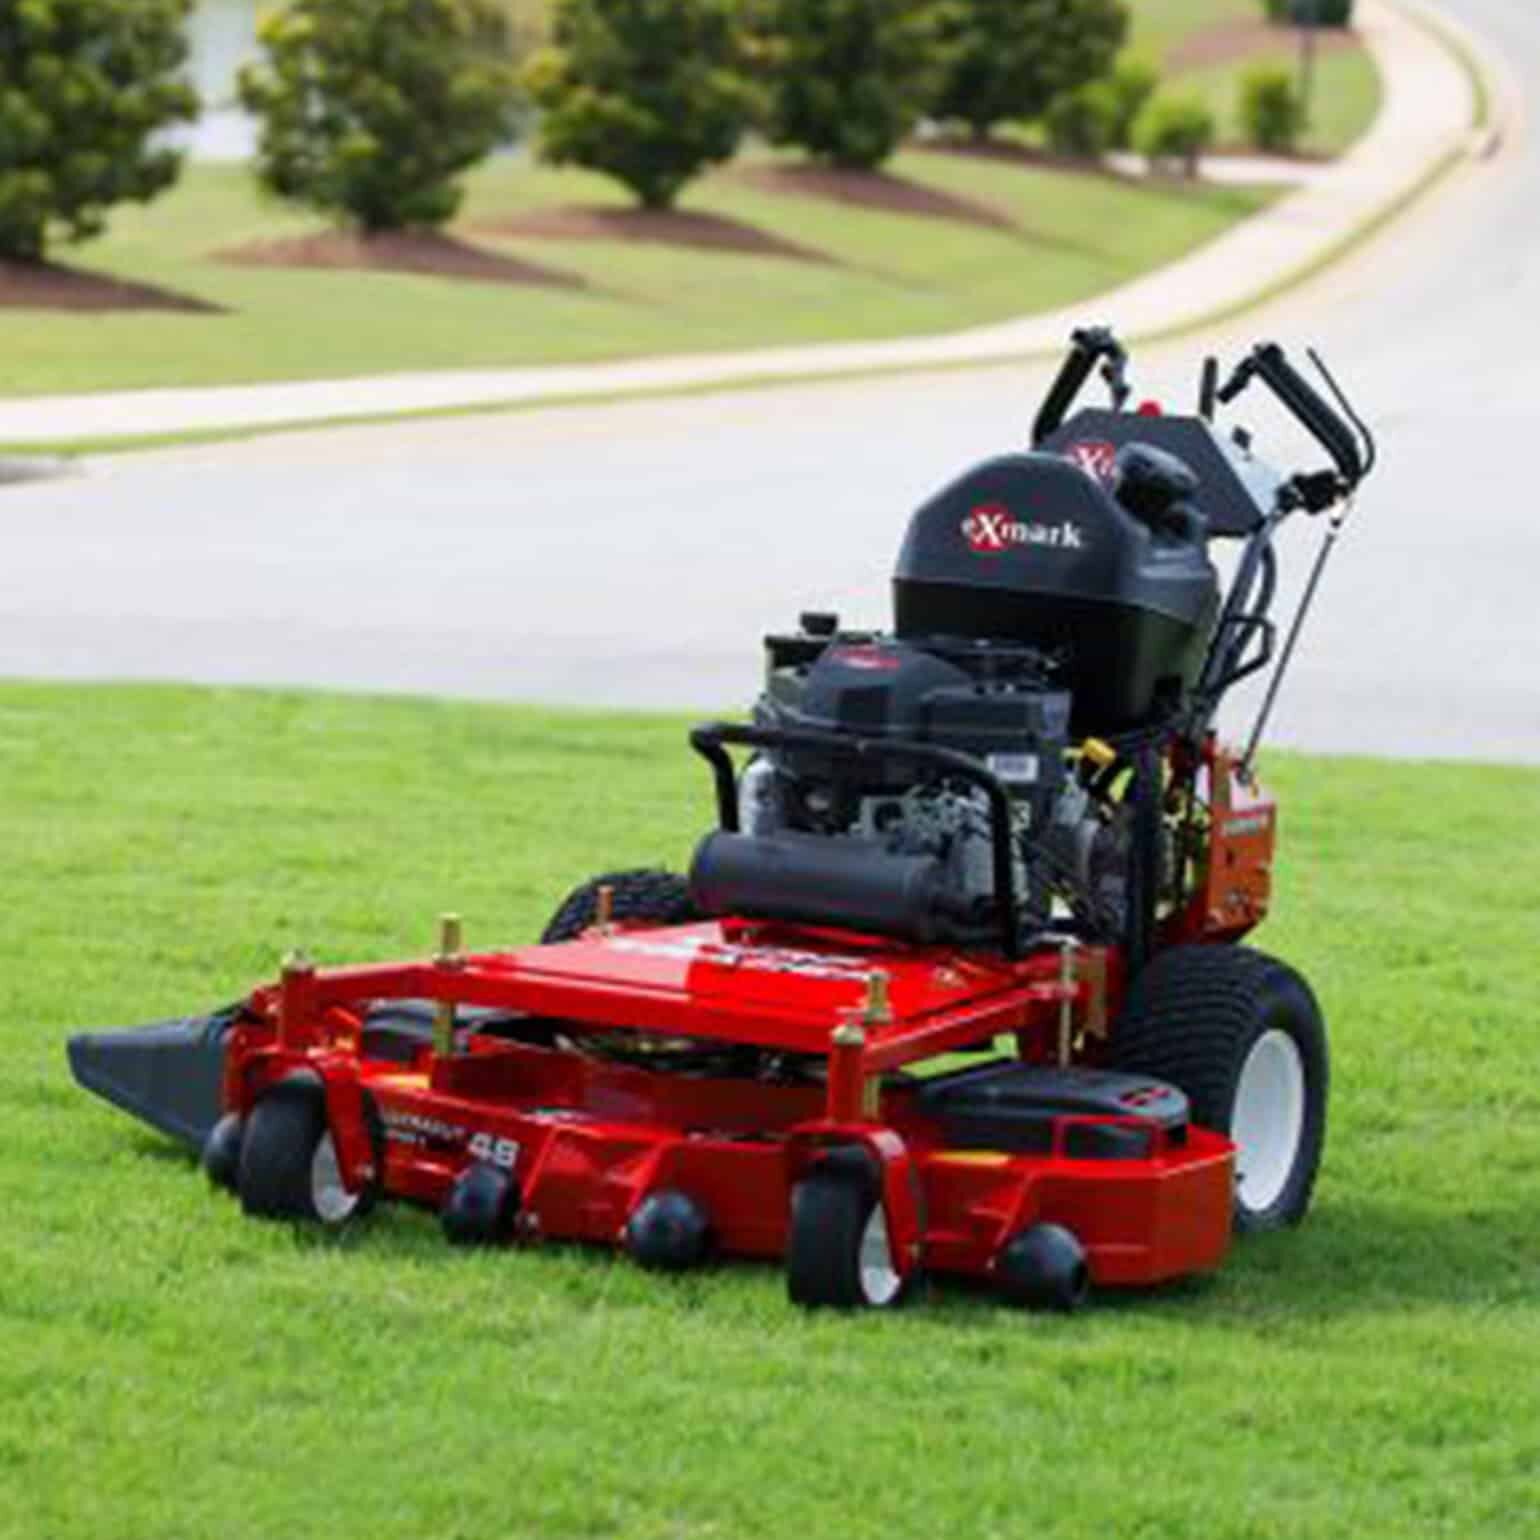 Exmark Turf Tracer S-Series Walk Behind Mower For Sale | BPS